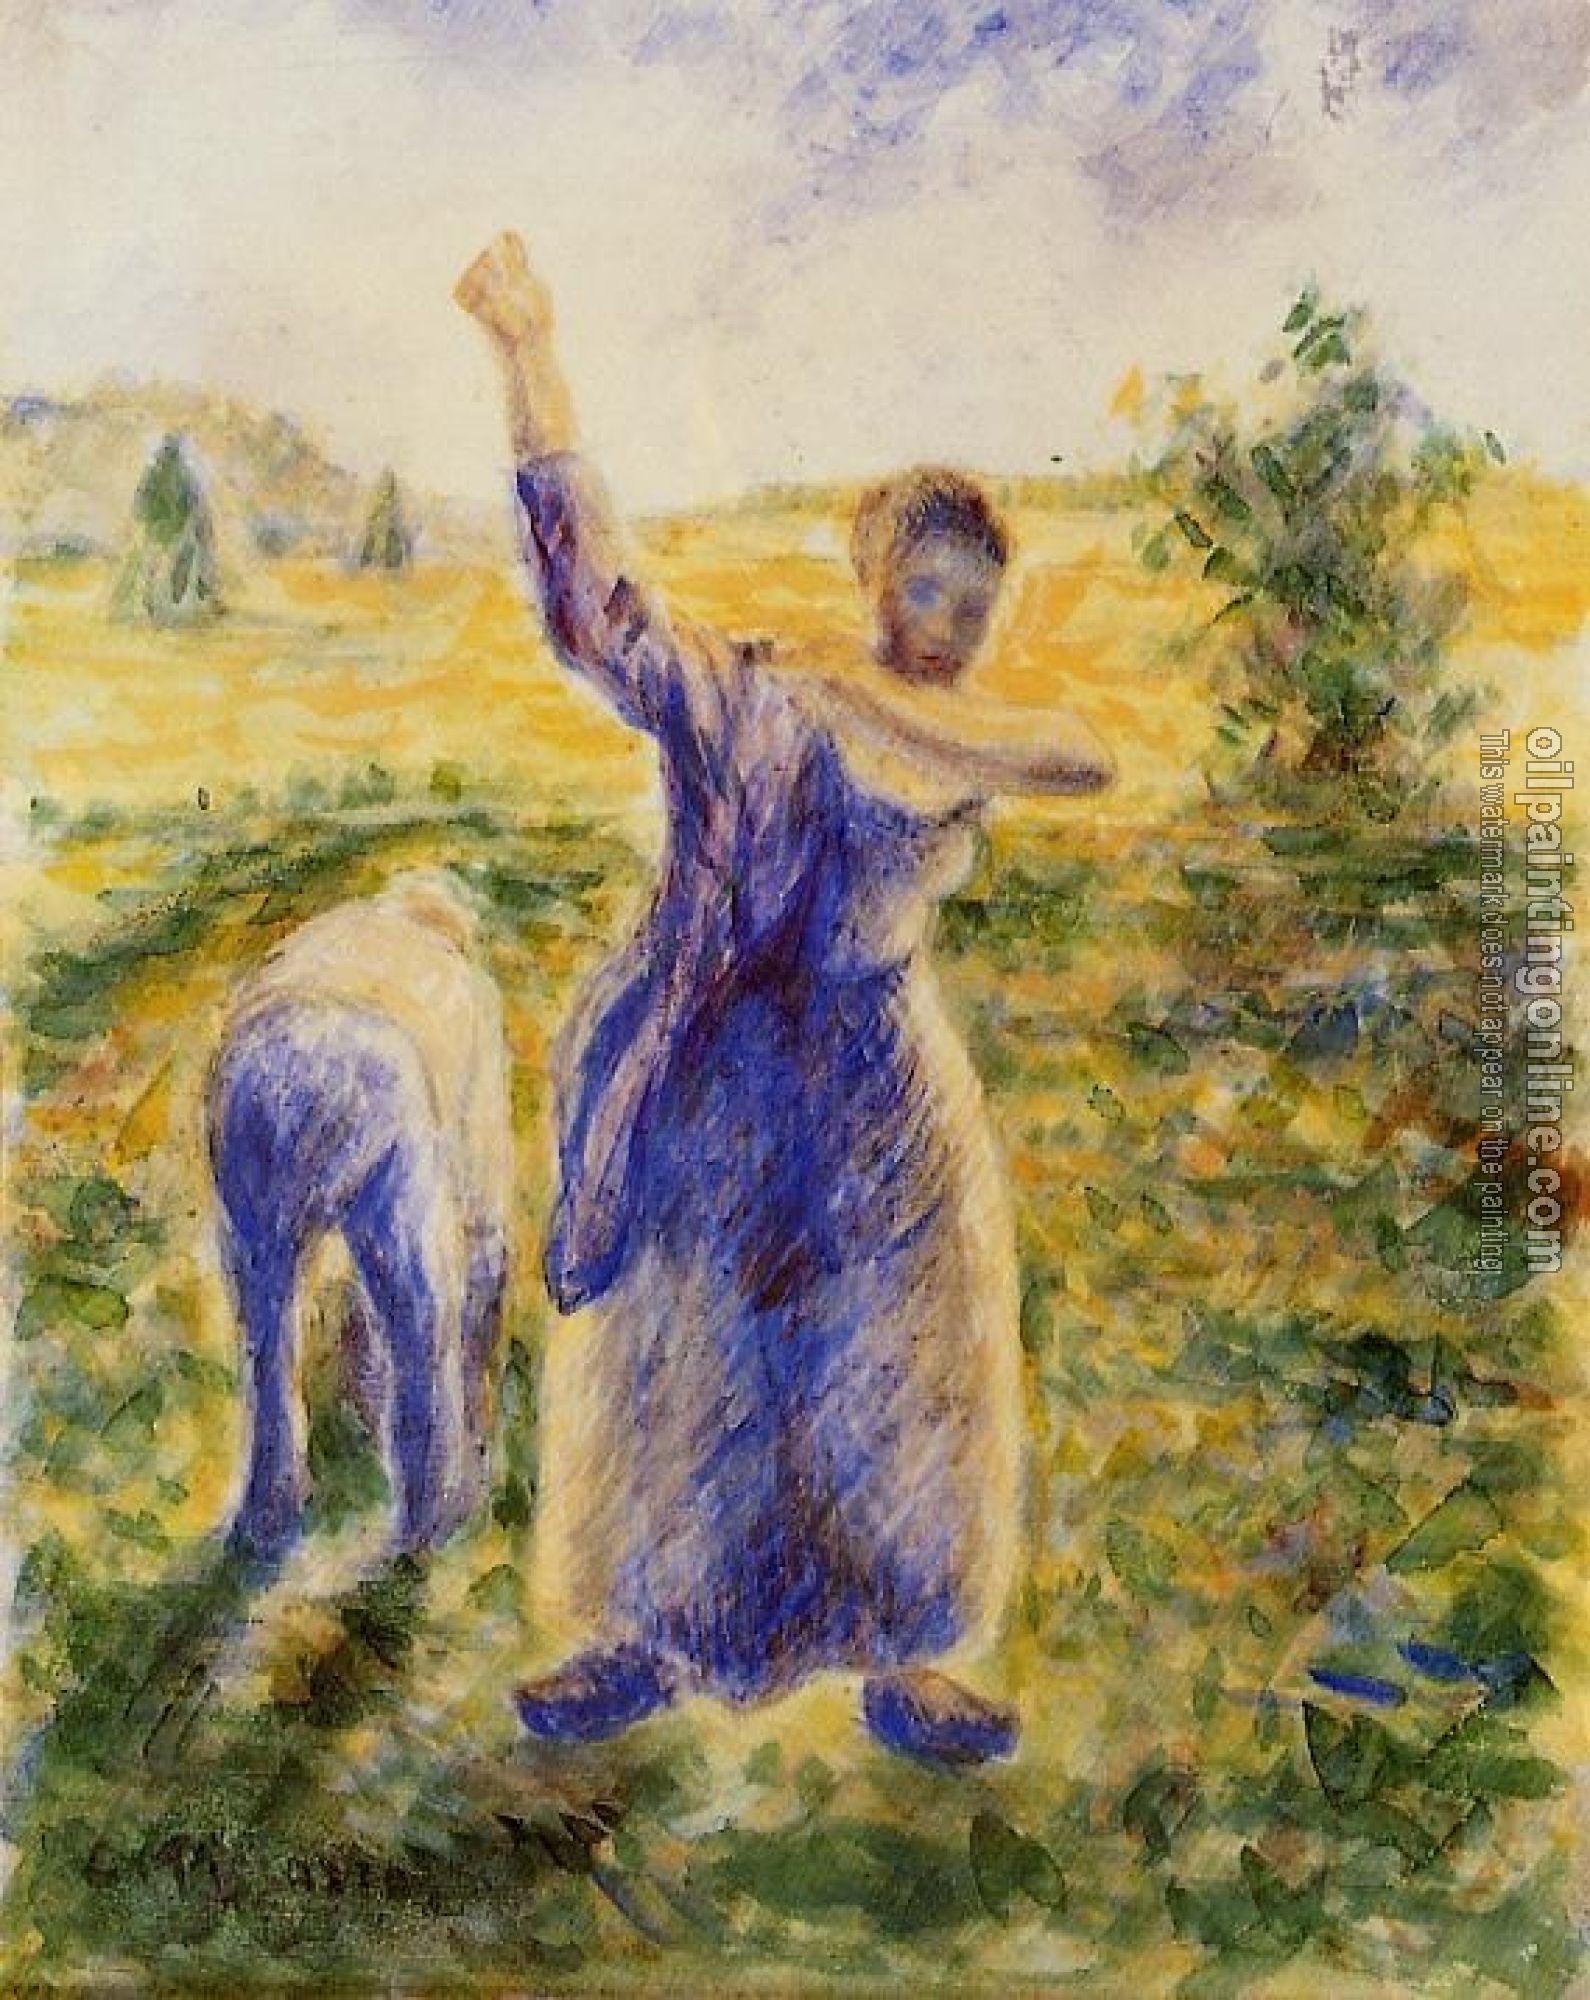 Pissarro, Camille - Workers in the Fields